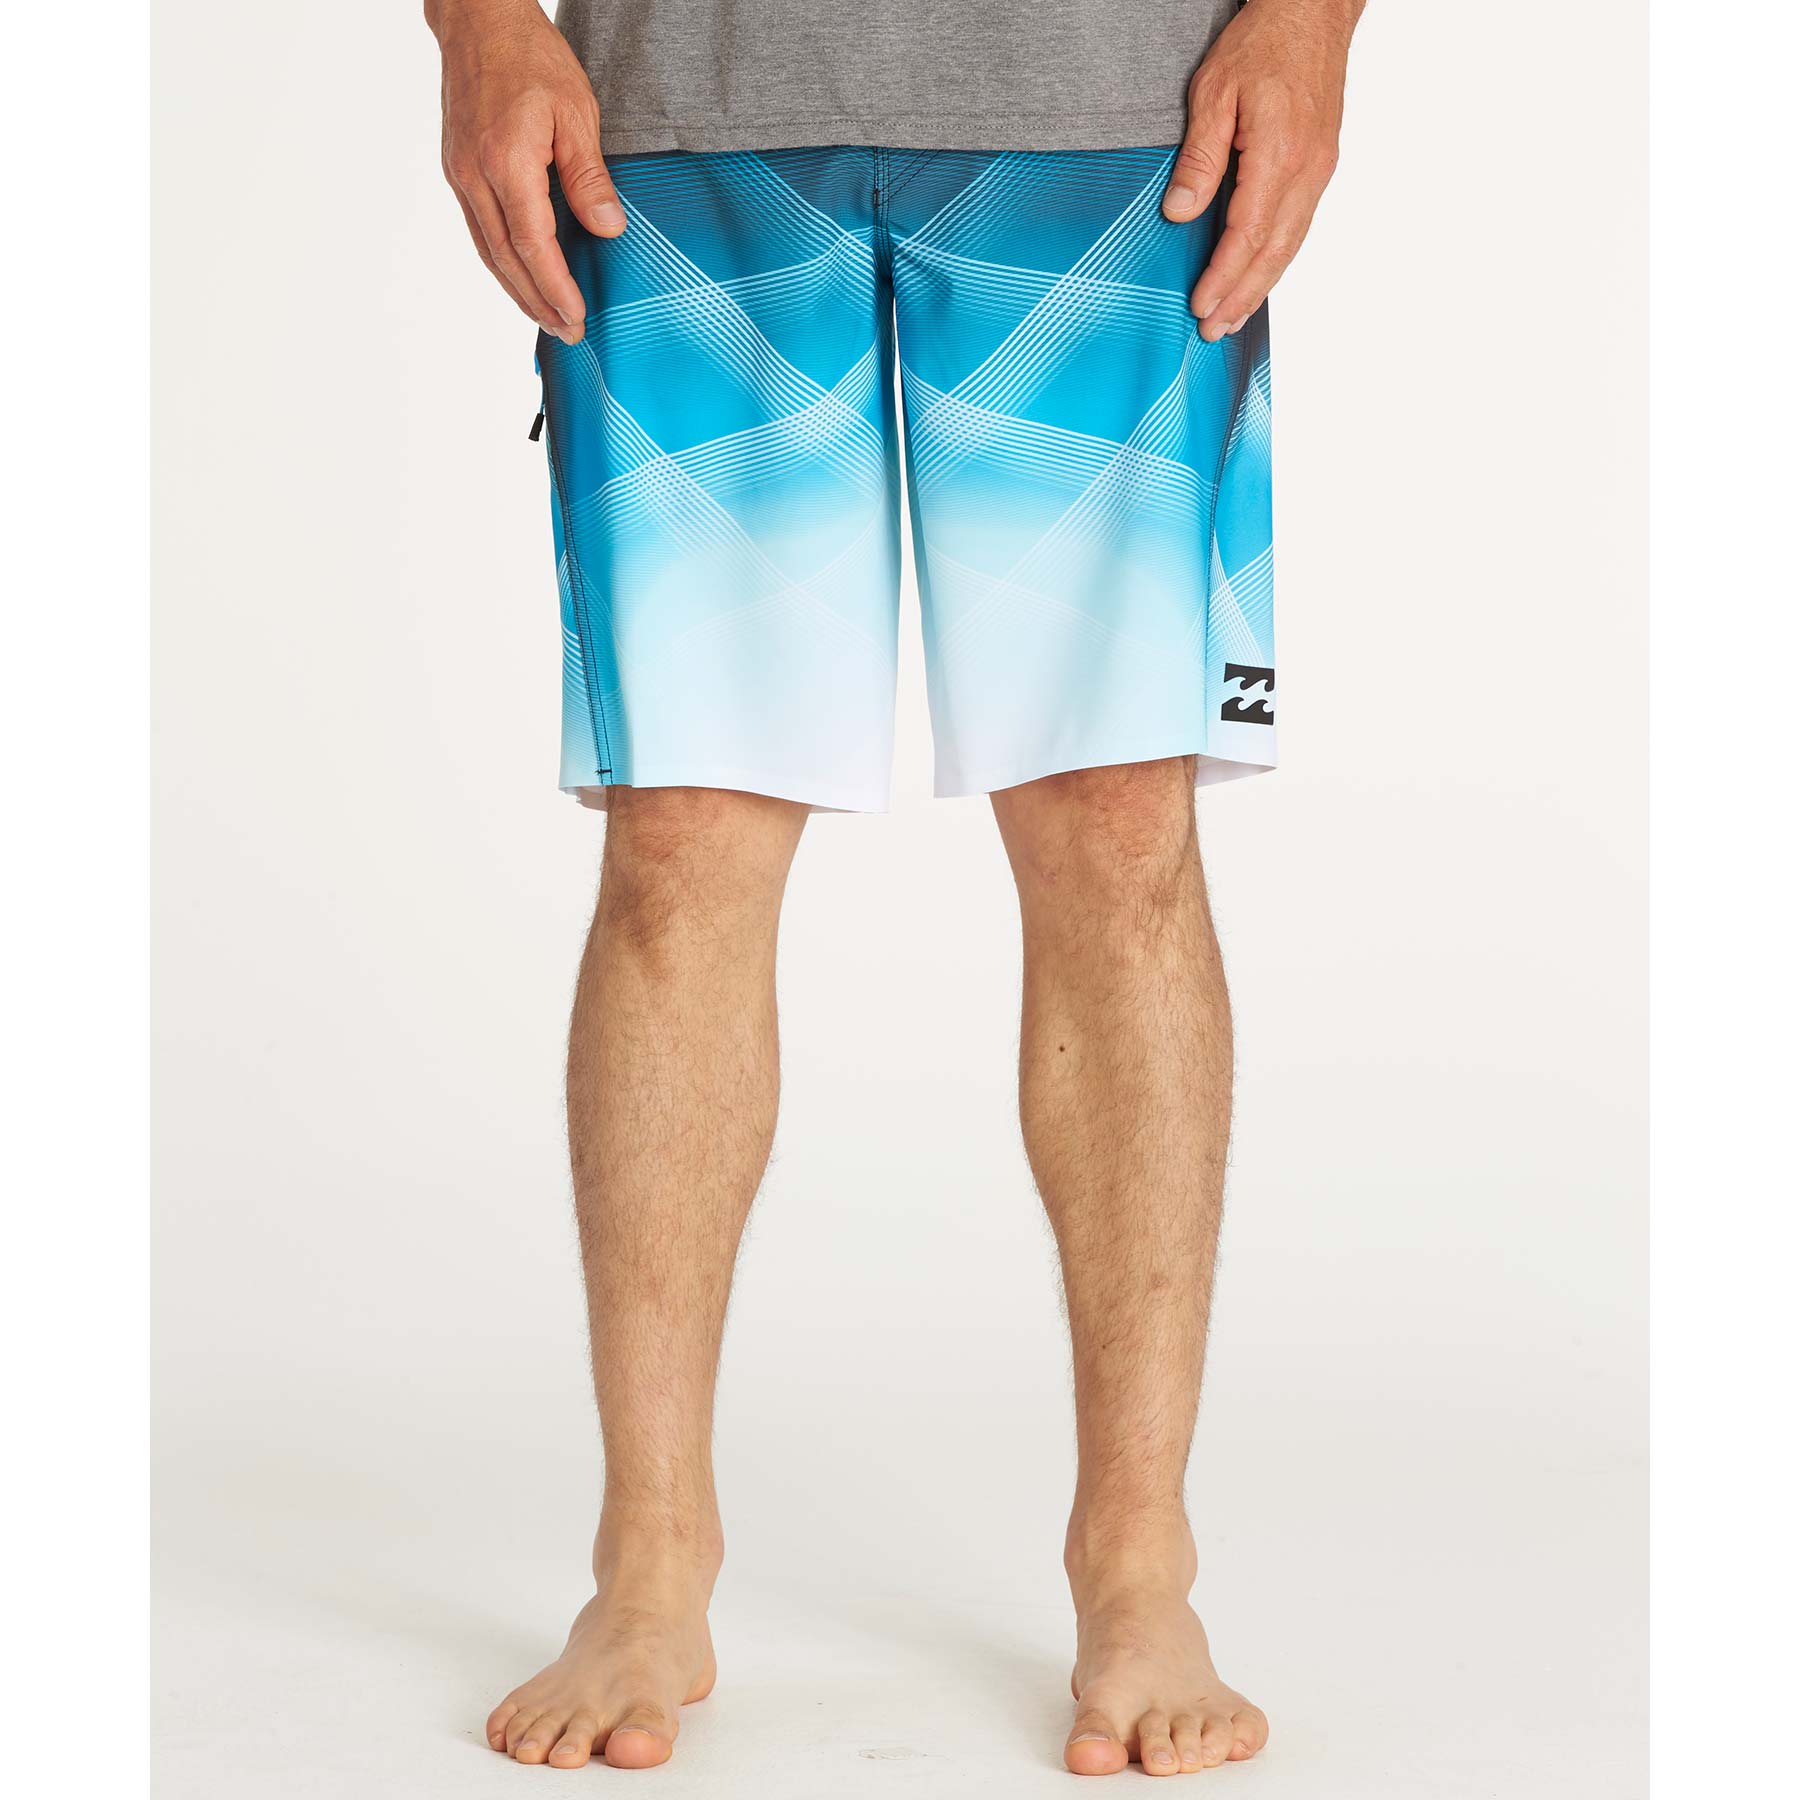 Save on all men's boardshorts from 88 Gear